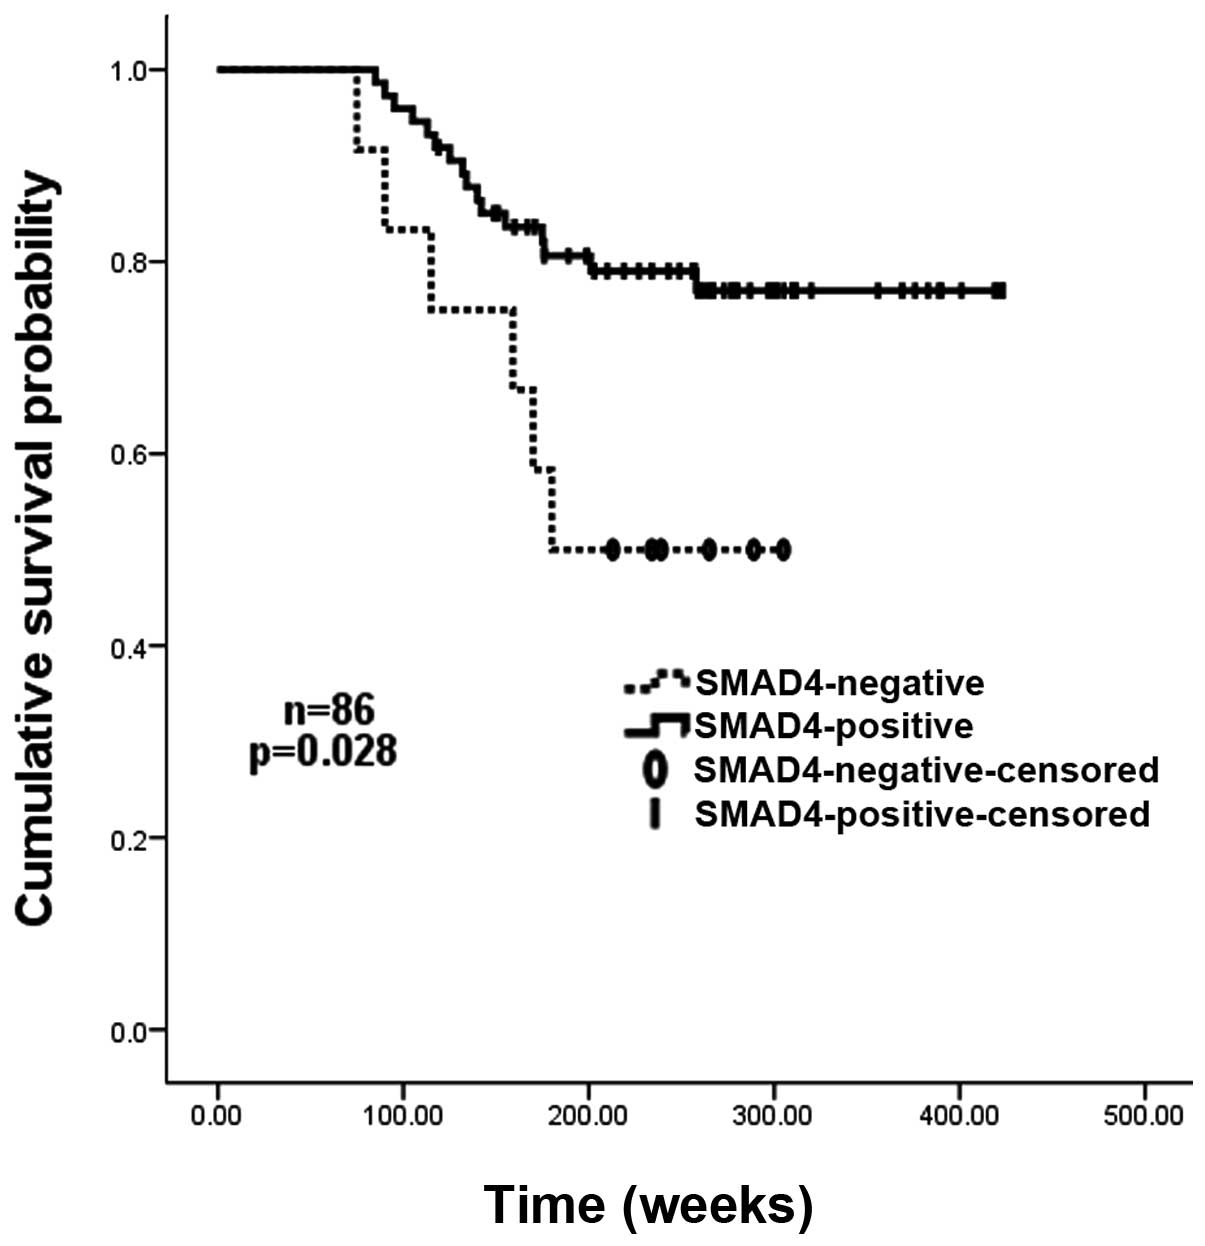 SMAD4 expression in breast ductal carcinoma correlates with prognosis